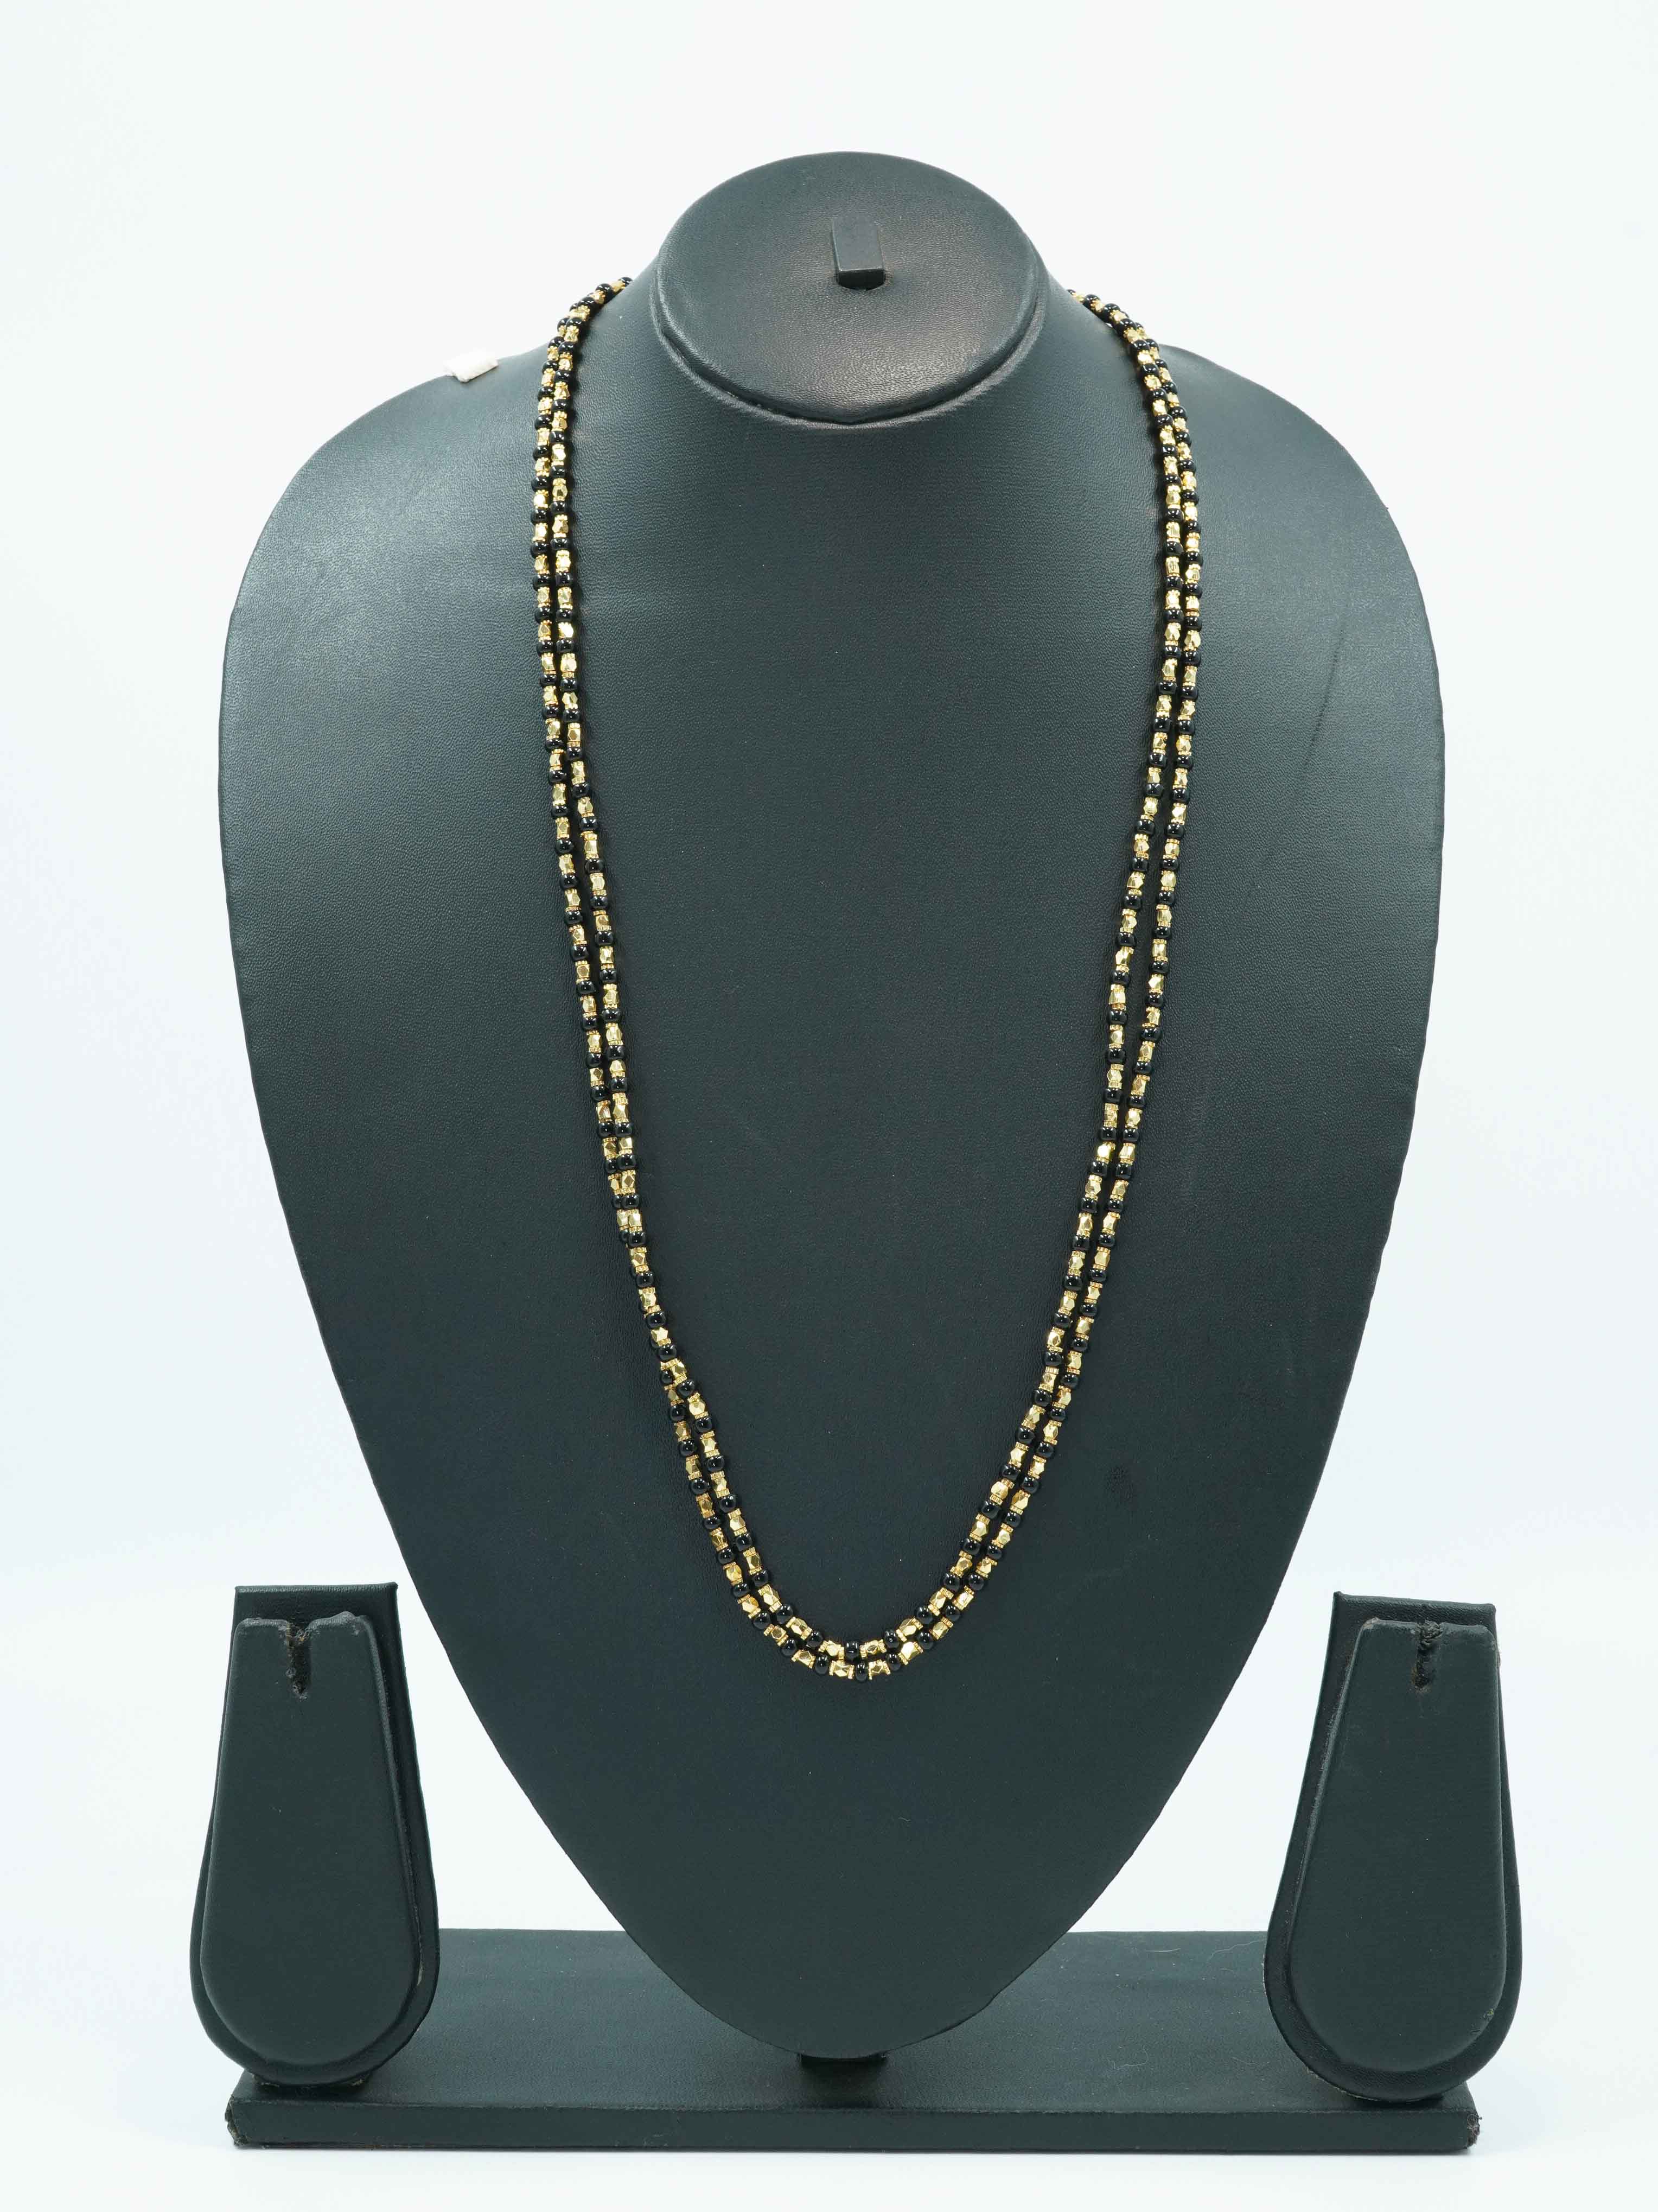 1 gm Micro gold plated 2 Line designer 30 inches chain with black beads 10644N